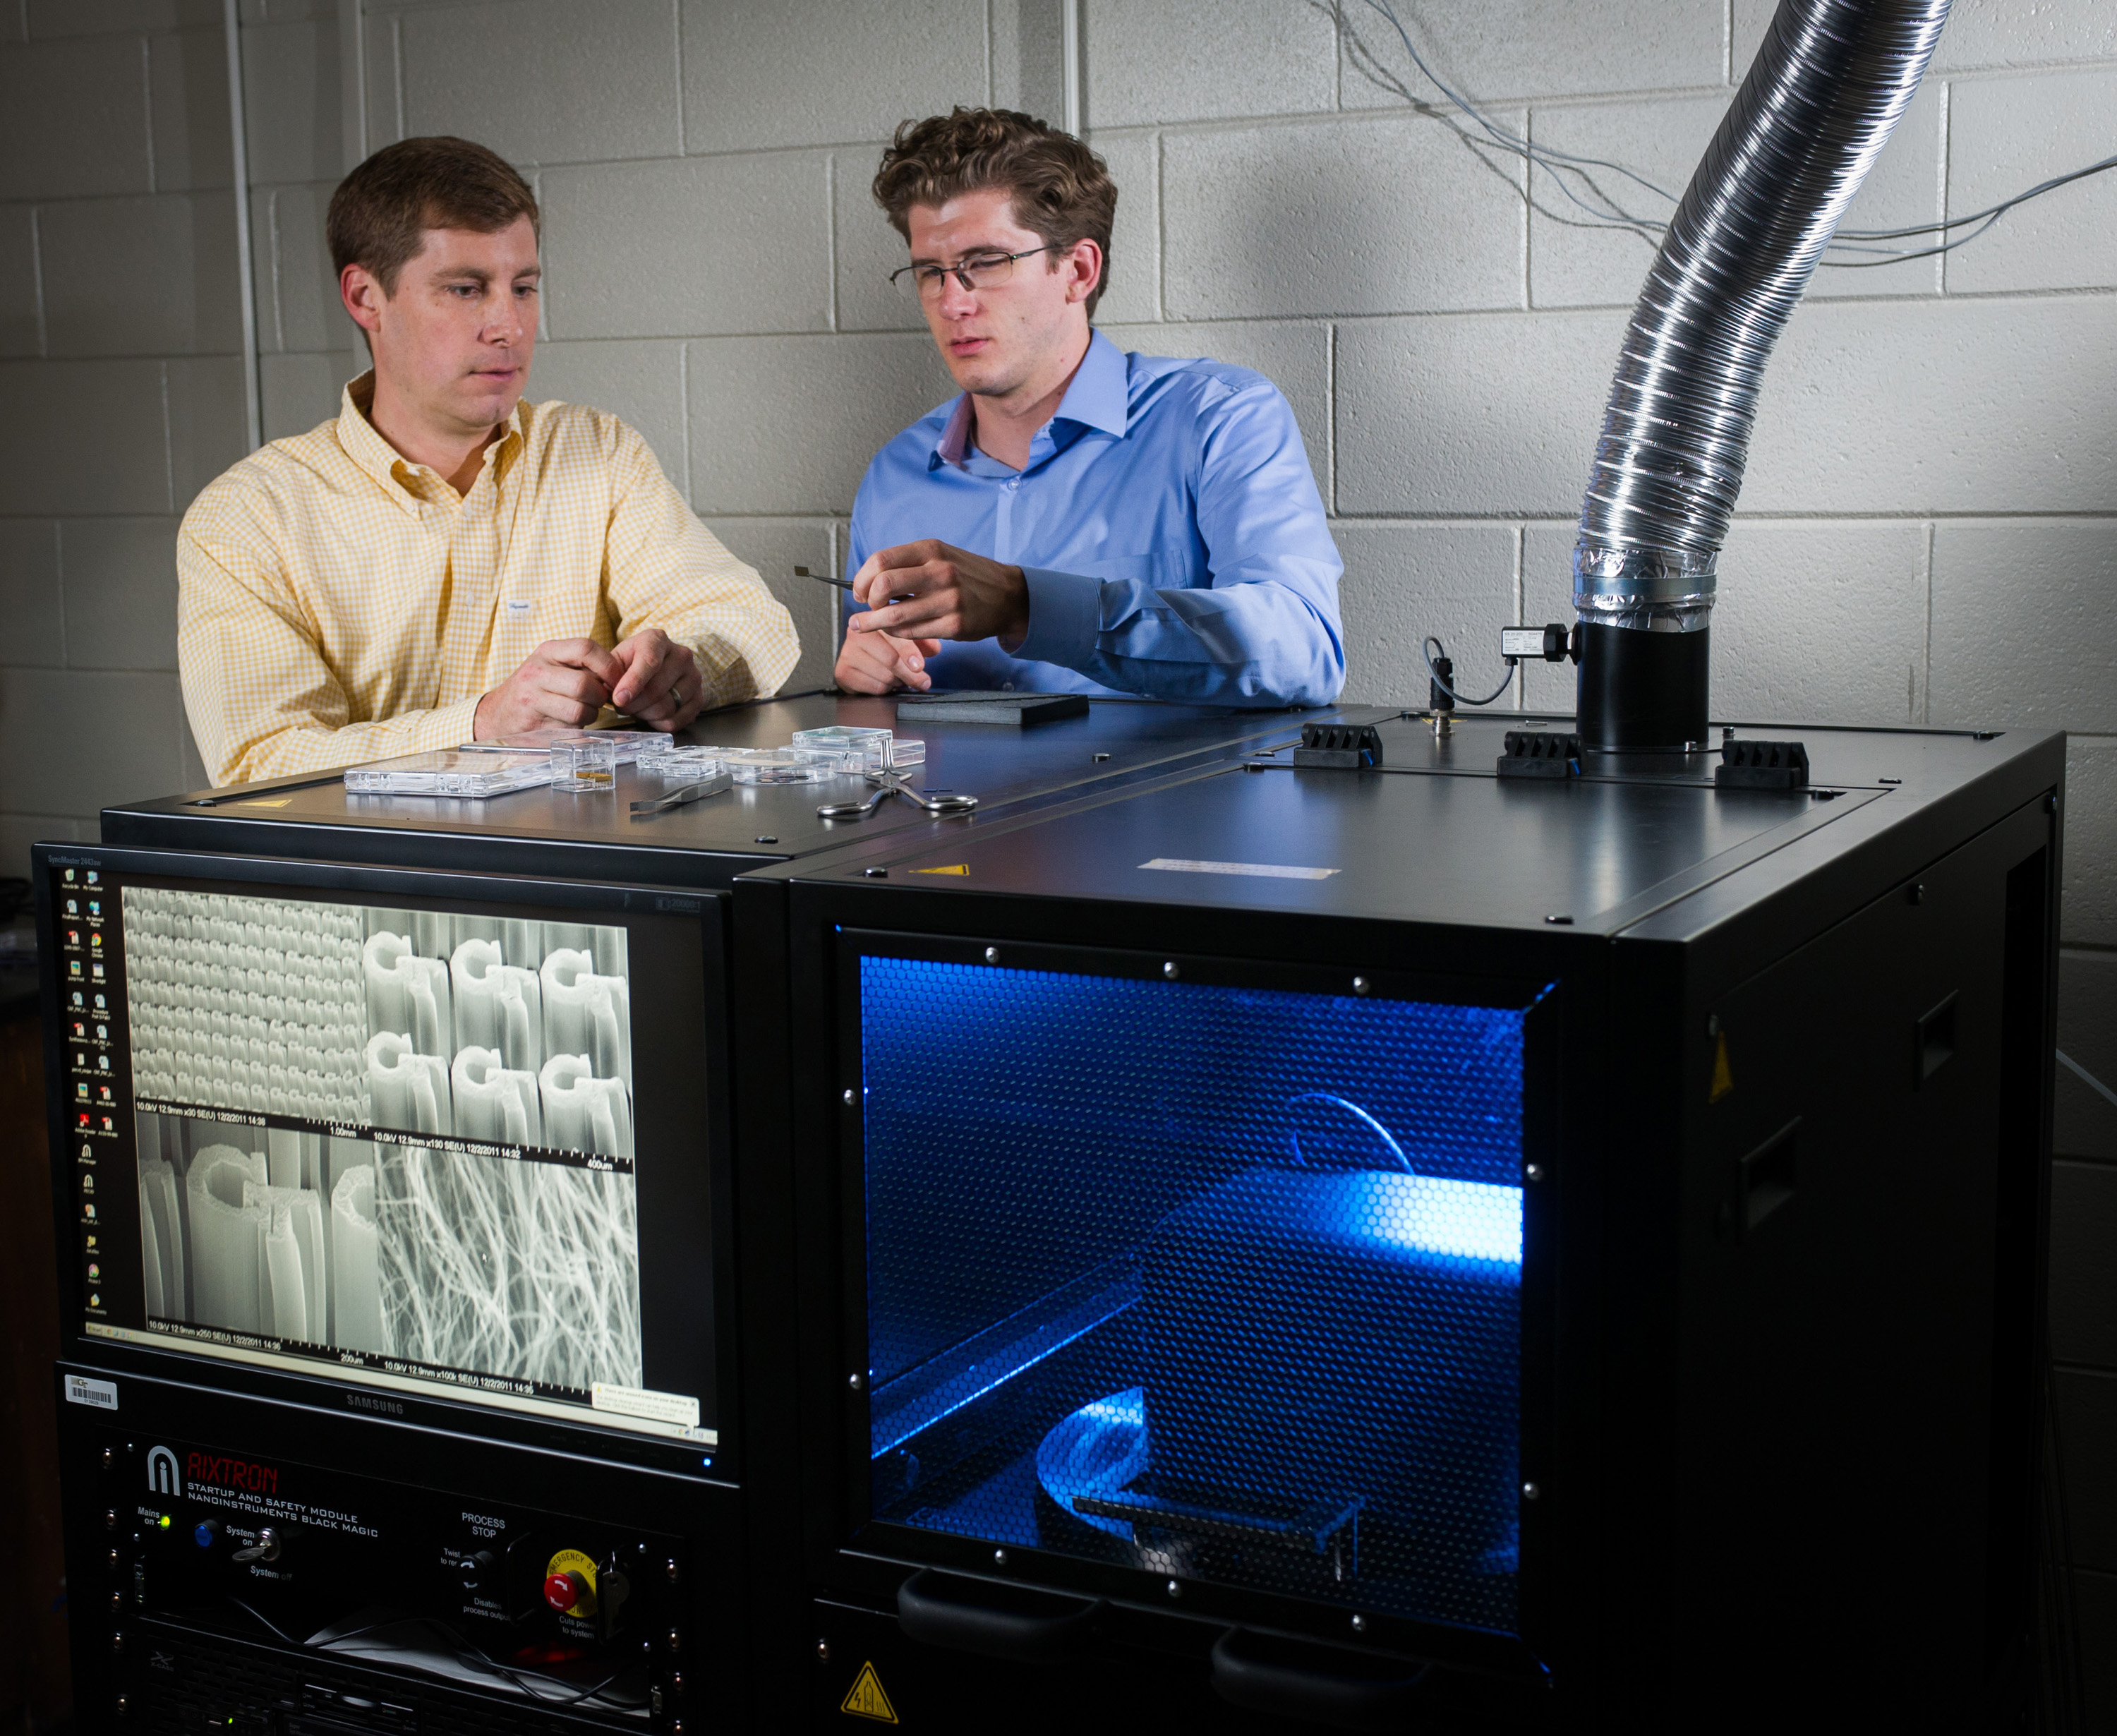 Georgia Tech researchers Jud Ready (left) and Graham Sanborn pose with equipment used to grow carbon nanotubes at the Georgia Tech Research Institute (GTRI) in Atlanta. The nanotubes are being tested for potential use in future electrically-powered ion propulsion systems. (Georgia Tech Photo: Rob Felt)